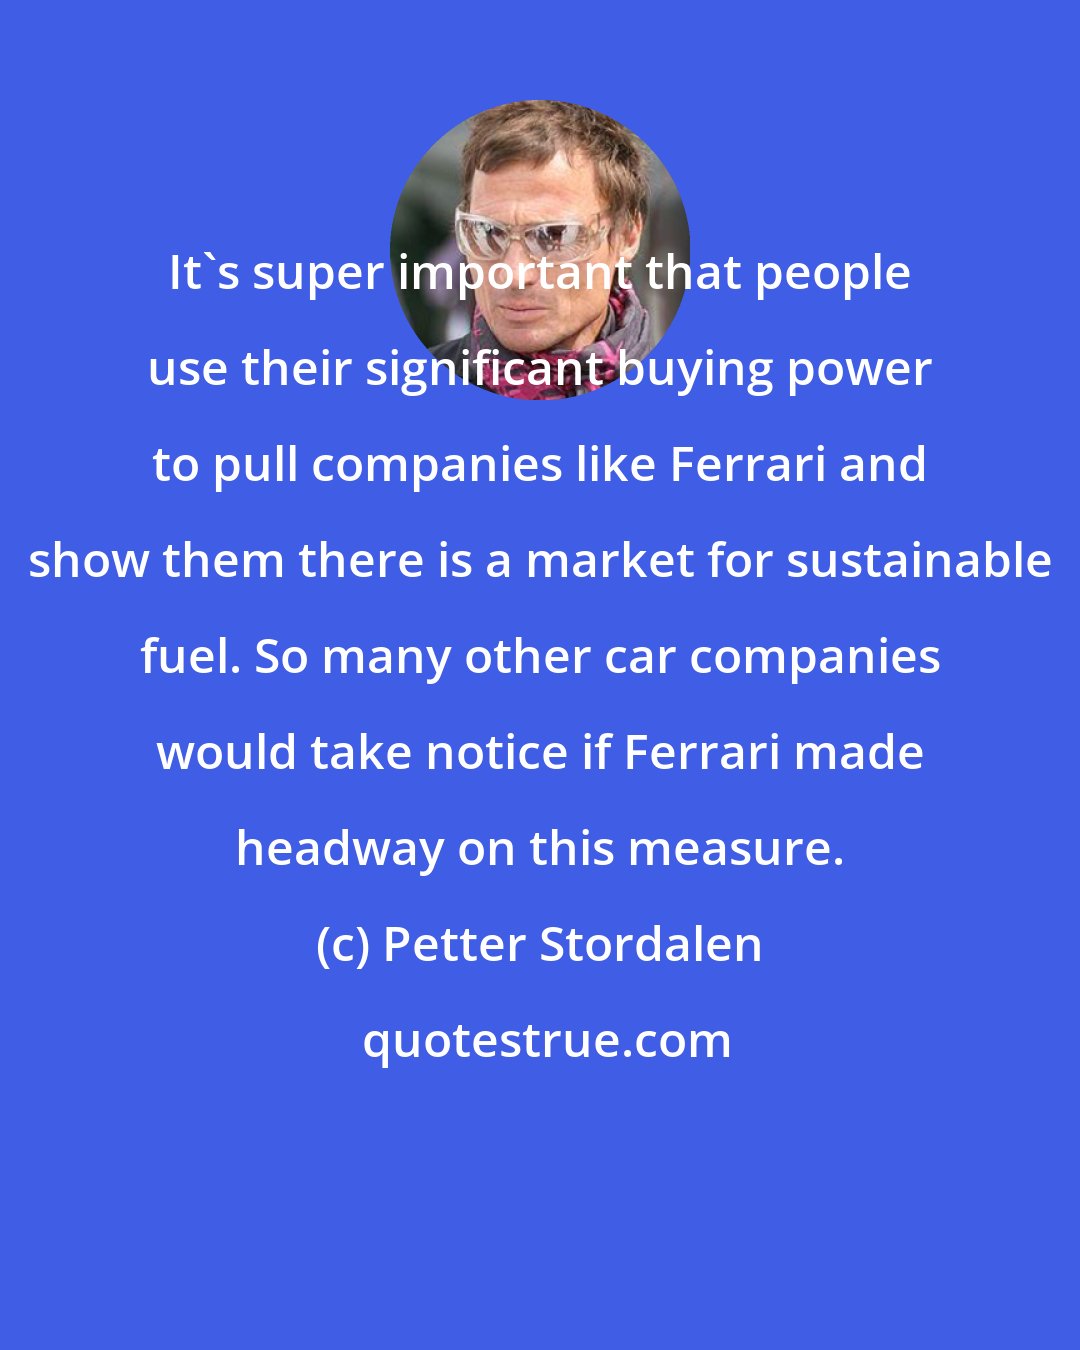 Petter Stordalen: It's super important that people use their significant buying power to pull companies like Ferrari and show them there is a market for sustainable fuel. So many other car companies would take notice if Ferrari made headway on this measure.